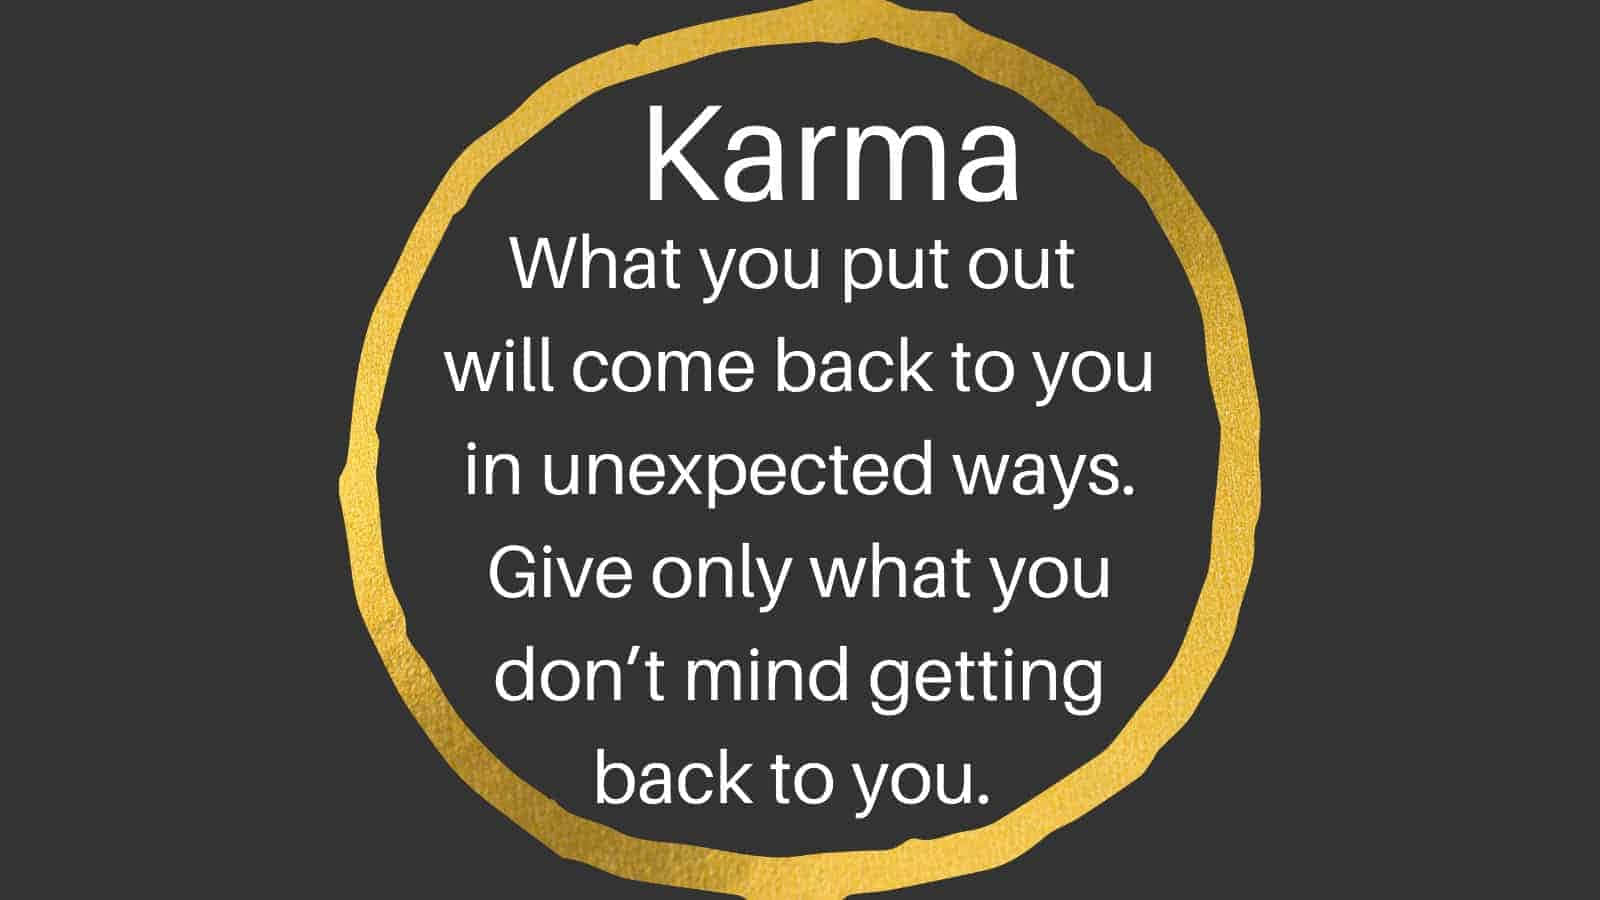 Karma Quotes - What You Put Out Will Come Back In Many Ways